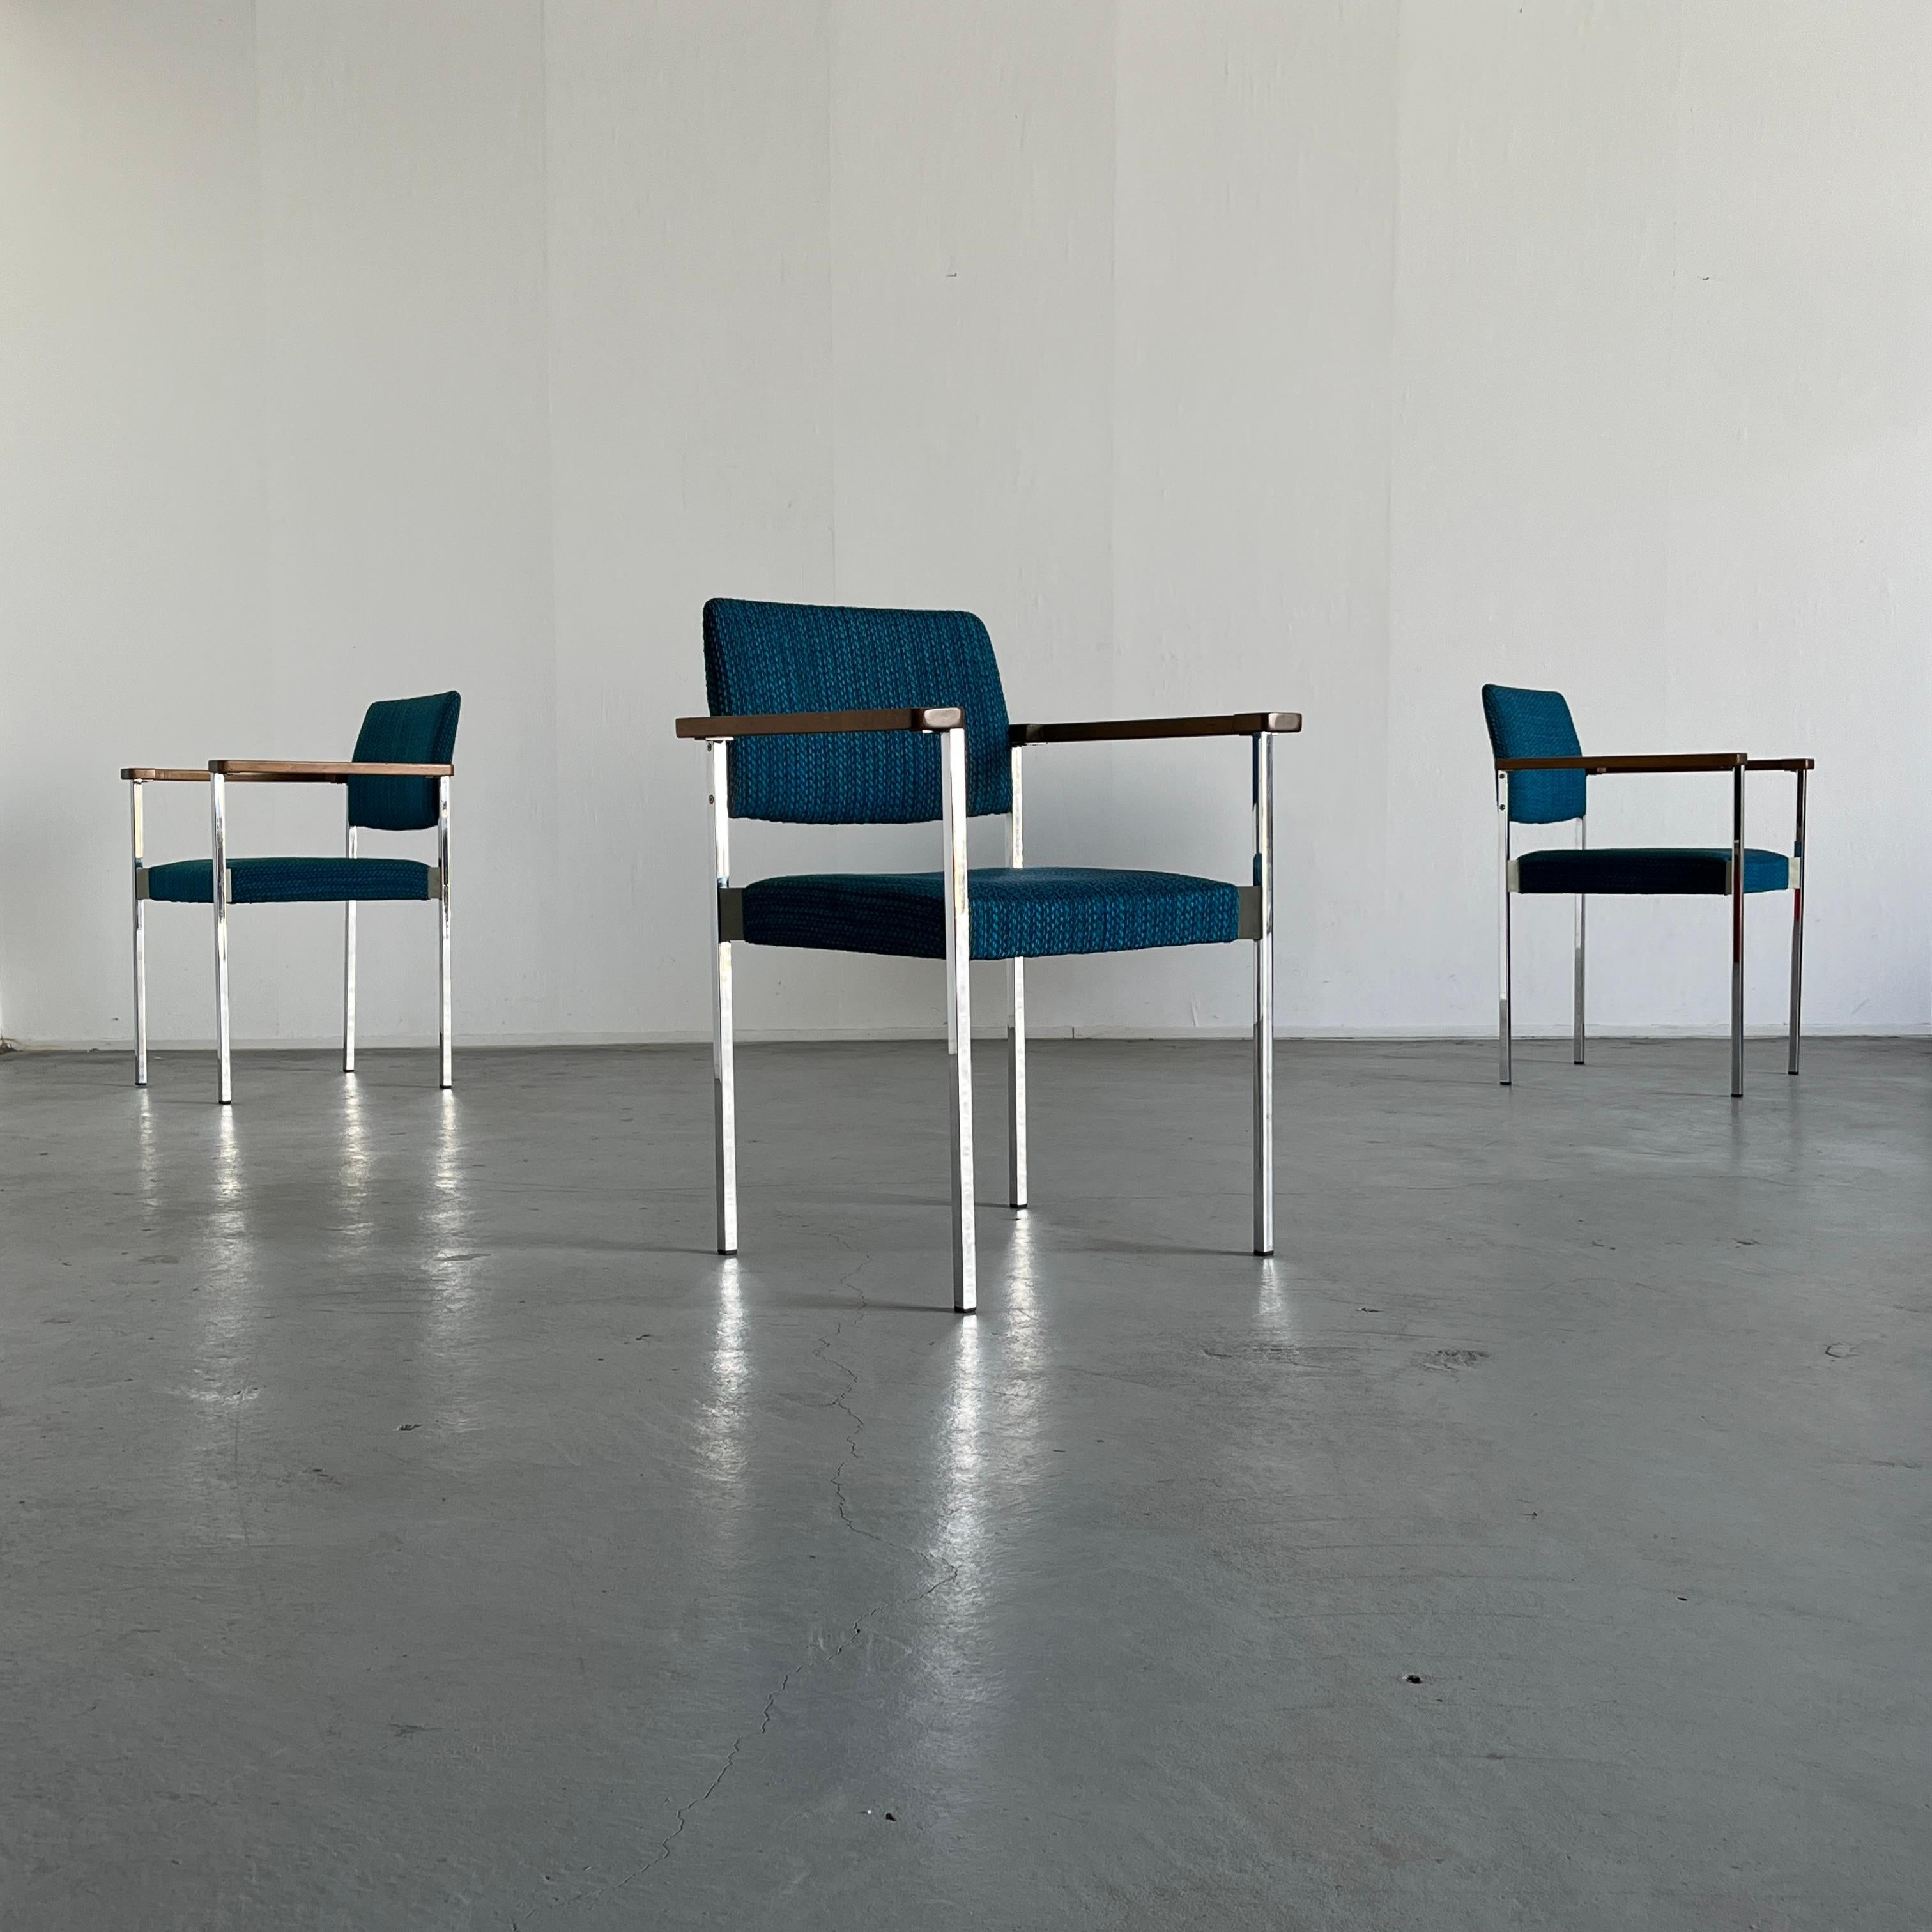 Mid-Century Modern stackable dining chairs or side armchairs with chrome frame, wooden armrests and amazing blue knitted upholstery. 
High production quality.

Original vintage condition with expected signs of age
Structurally excellent. Upholstery